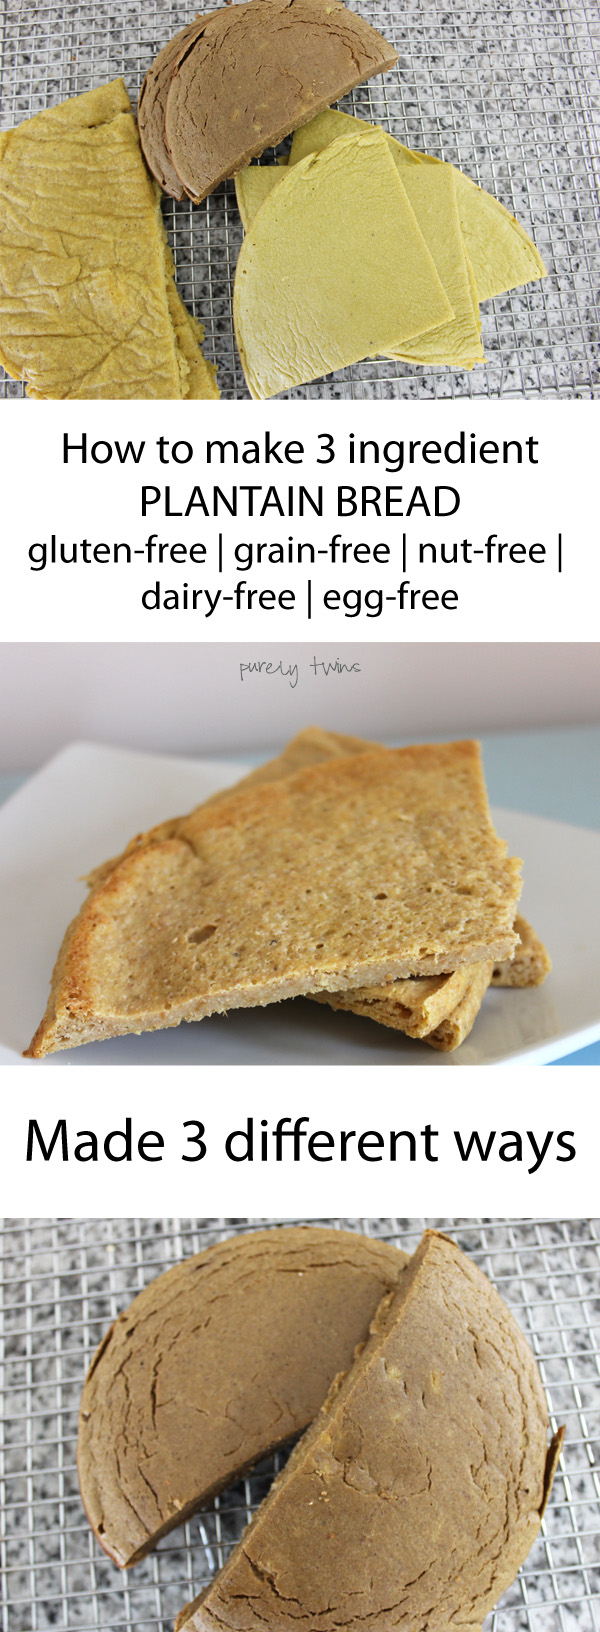 How to make gluten-free, grain-free, dairy-free and egg-free option of plantain bread plus a more single serving option